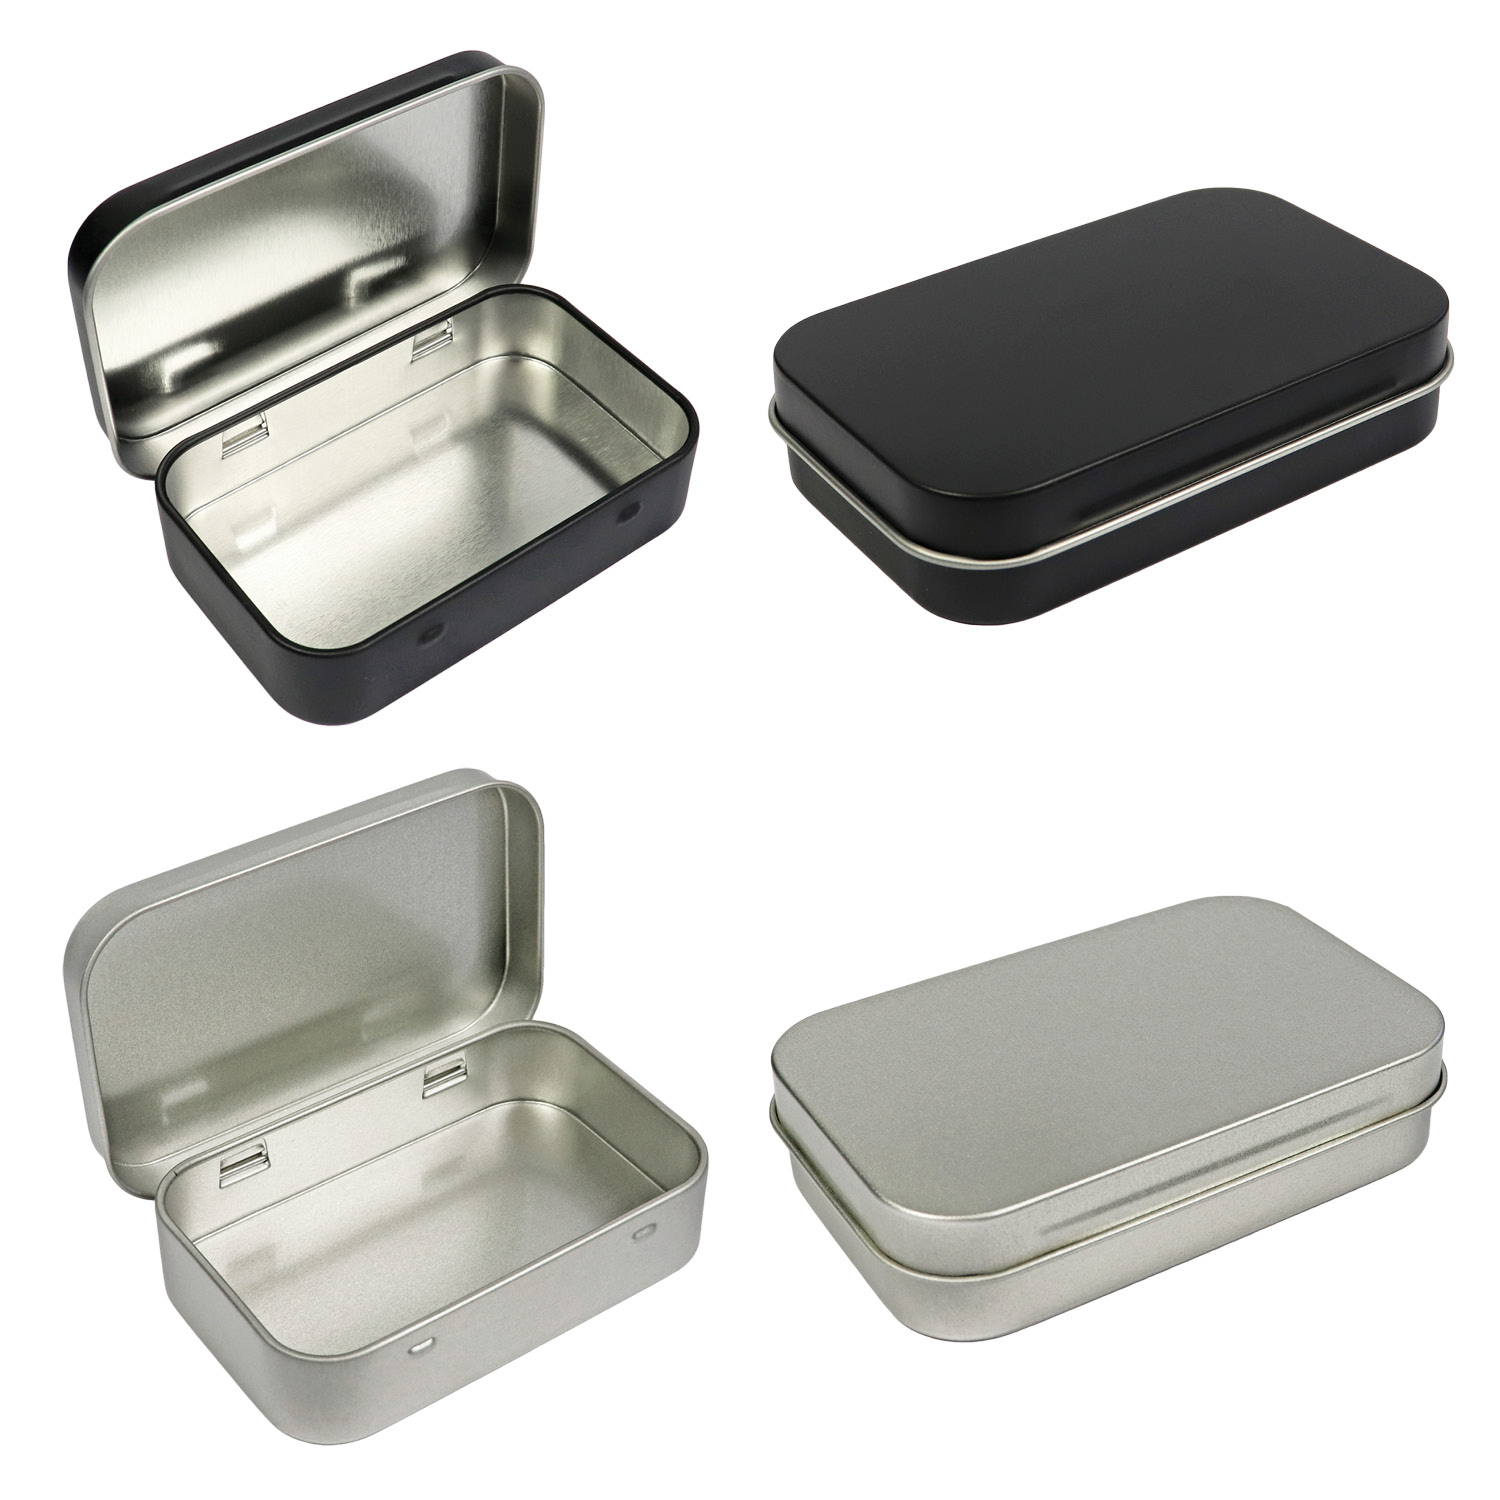 4 Pack Metal Rectangular Empty Hinged Tins Box Containers 3.75 by 2.45 by  0.8 Inch Silver & Black Mini Portable Box Small Storage Kit Home Organizer  (2 Black 2 Silver) 